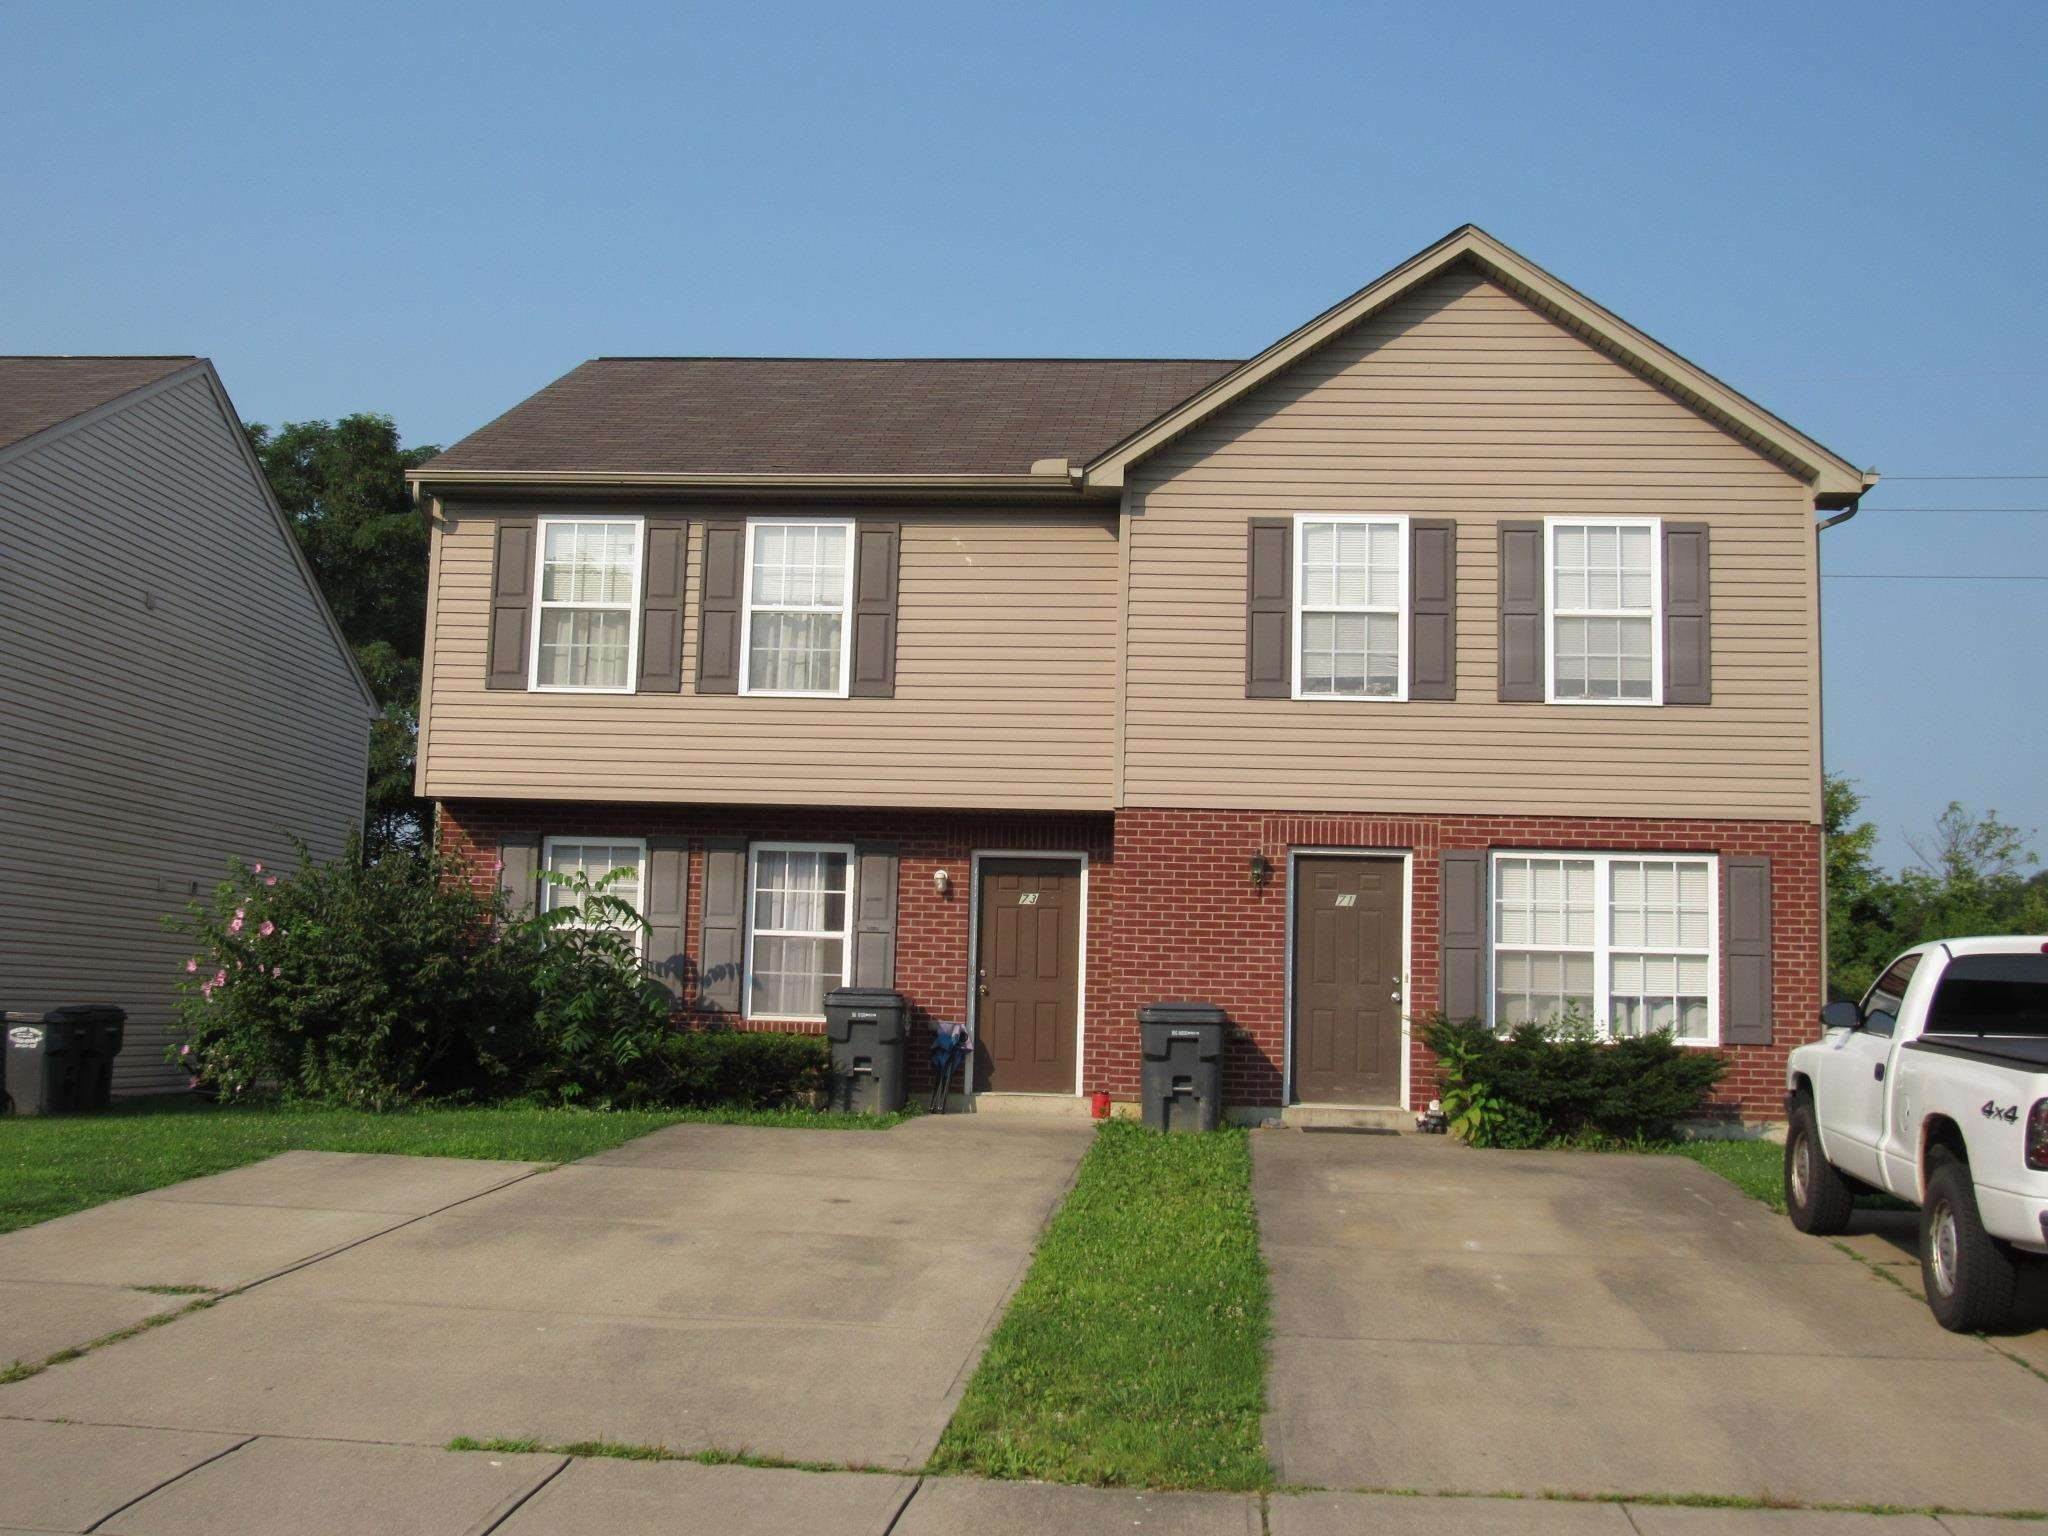 2. Multi Family for Sale at 71 Old Stephenson 71 Old Stephenson Walton, Kentucky 41094 United States